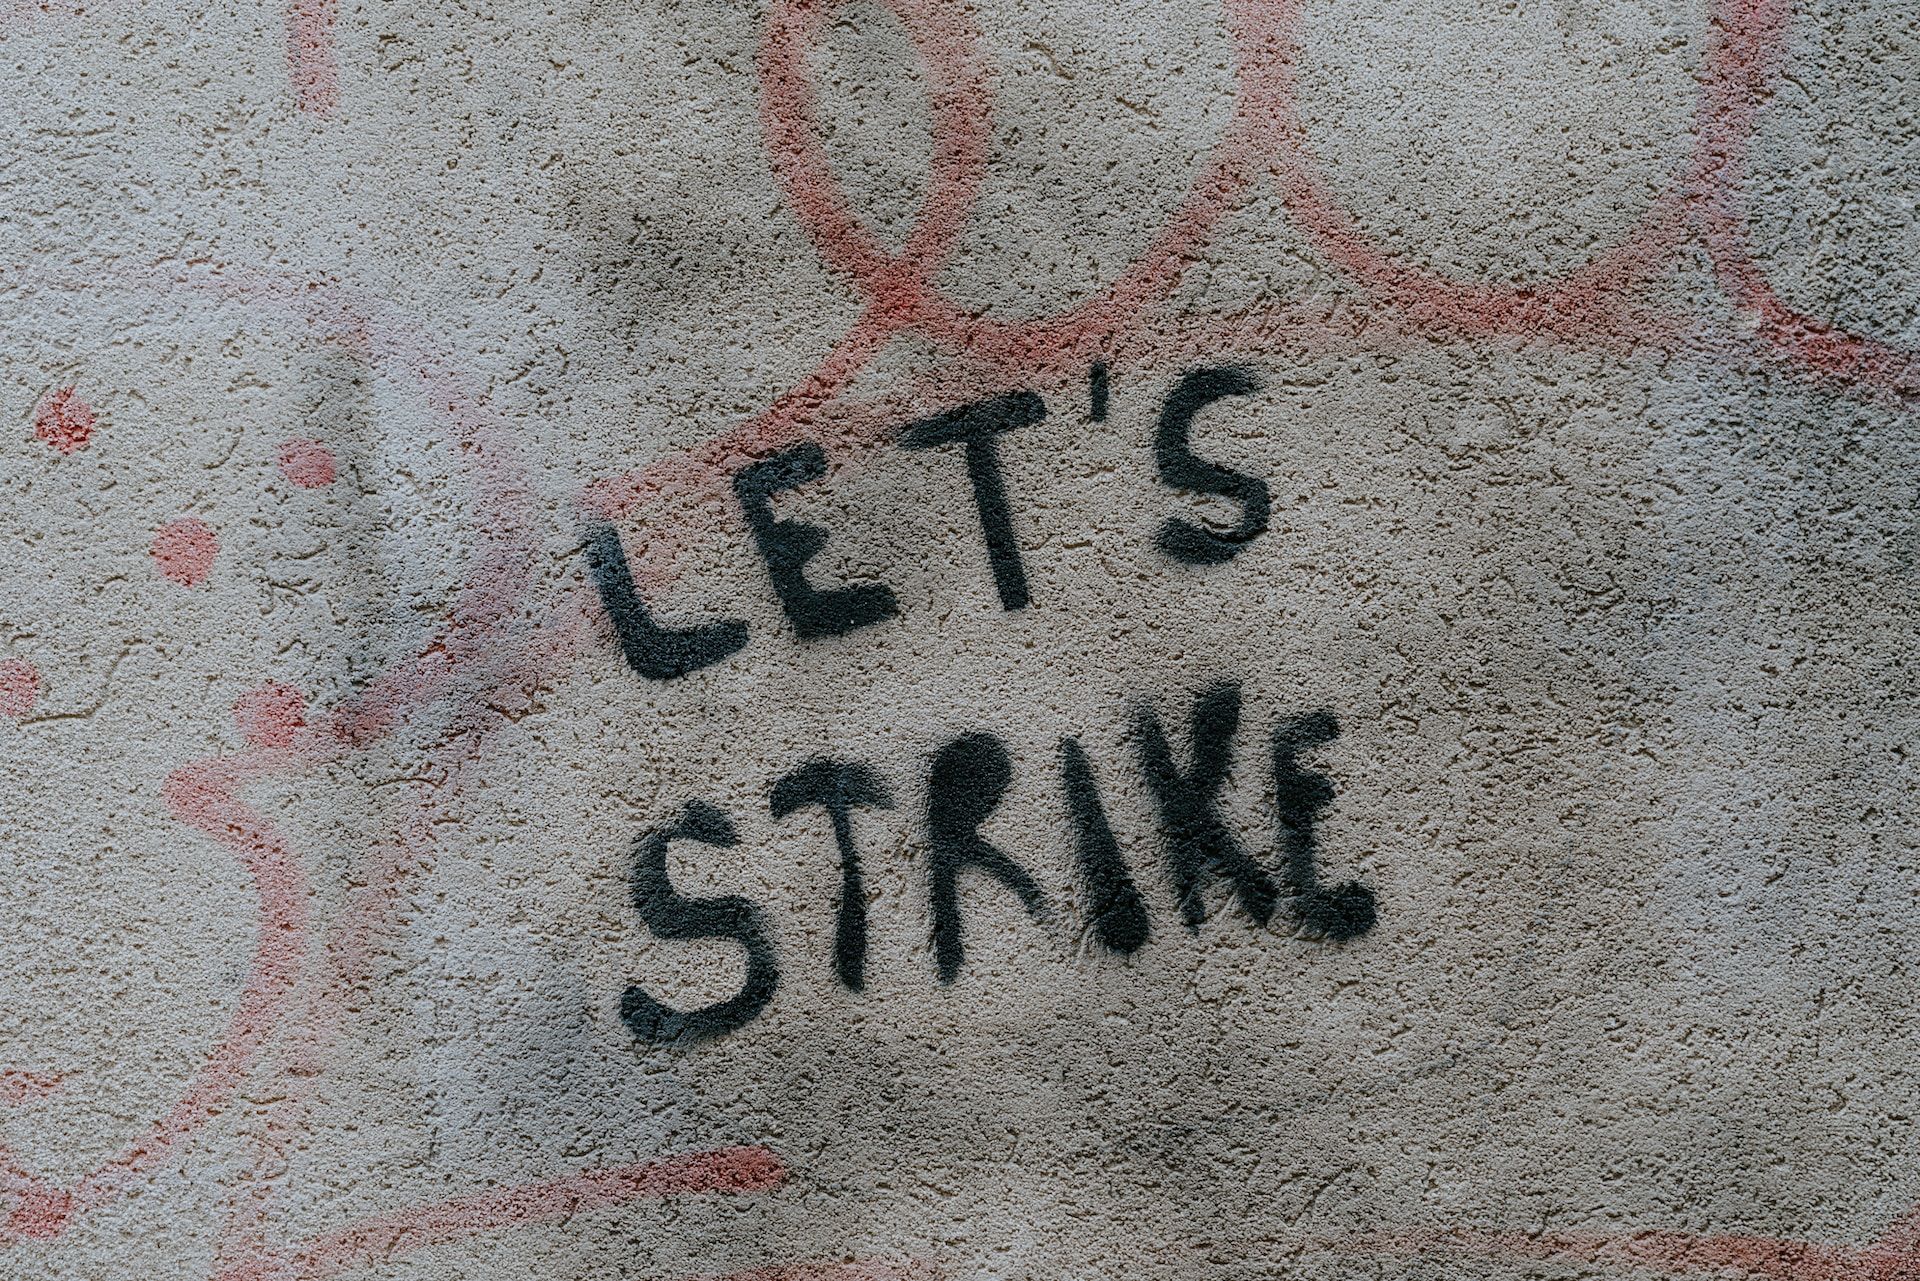 How The Right To Strike Is Being Eroded In Canada